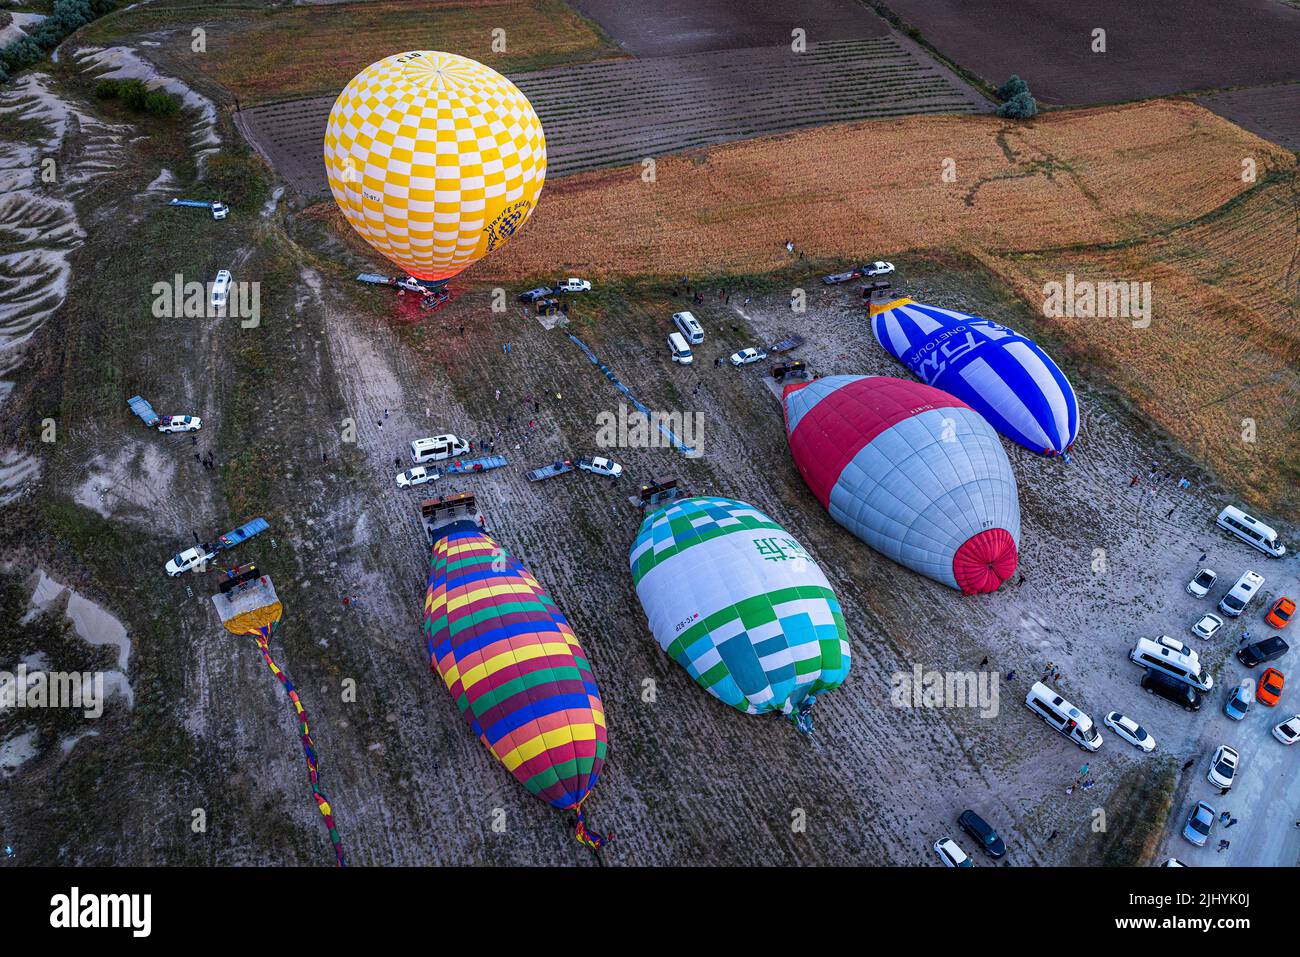 GOREME/TURKEY - June 26, 2022: hot air balloons are deflated after the tourist flight. Stock Photo